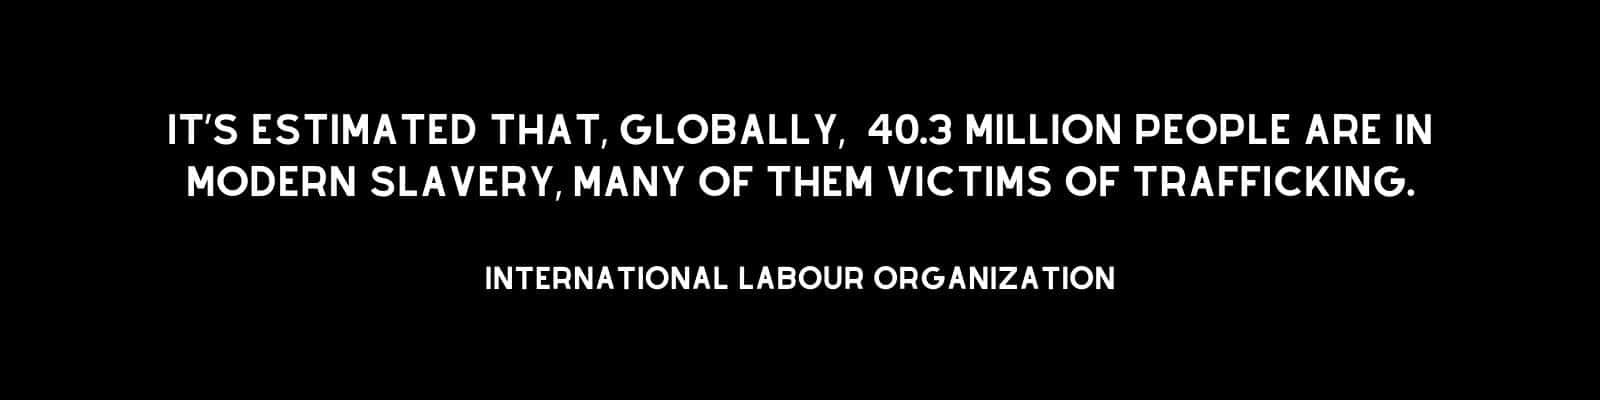 "It’s estimated that 40.3 million people are in modern slavery, many of them victims of trafficking. International Labour Organization"